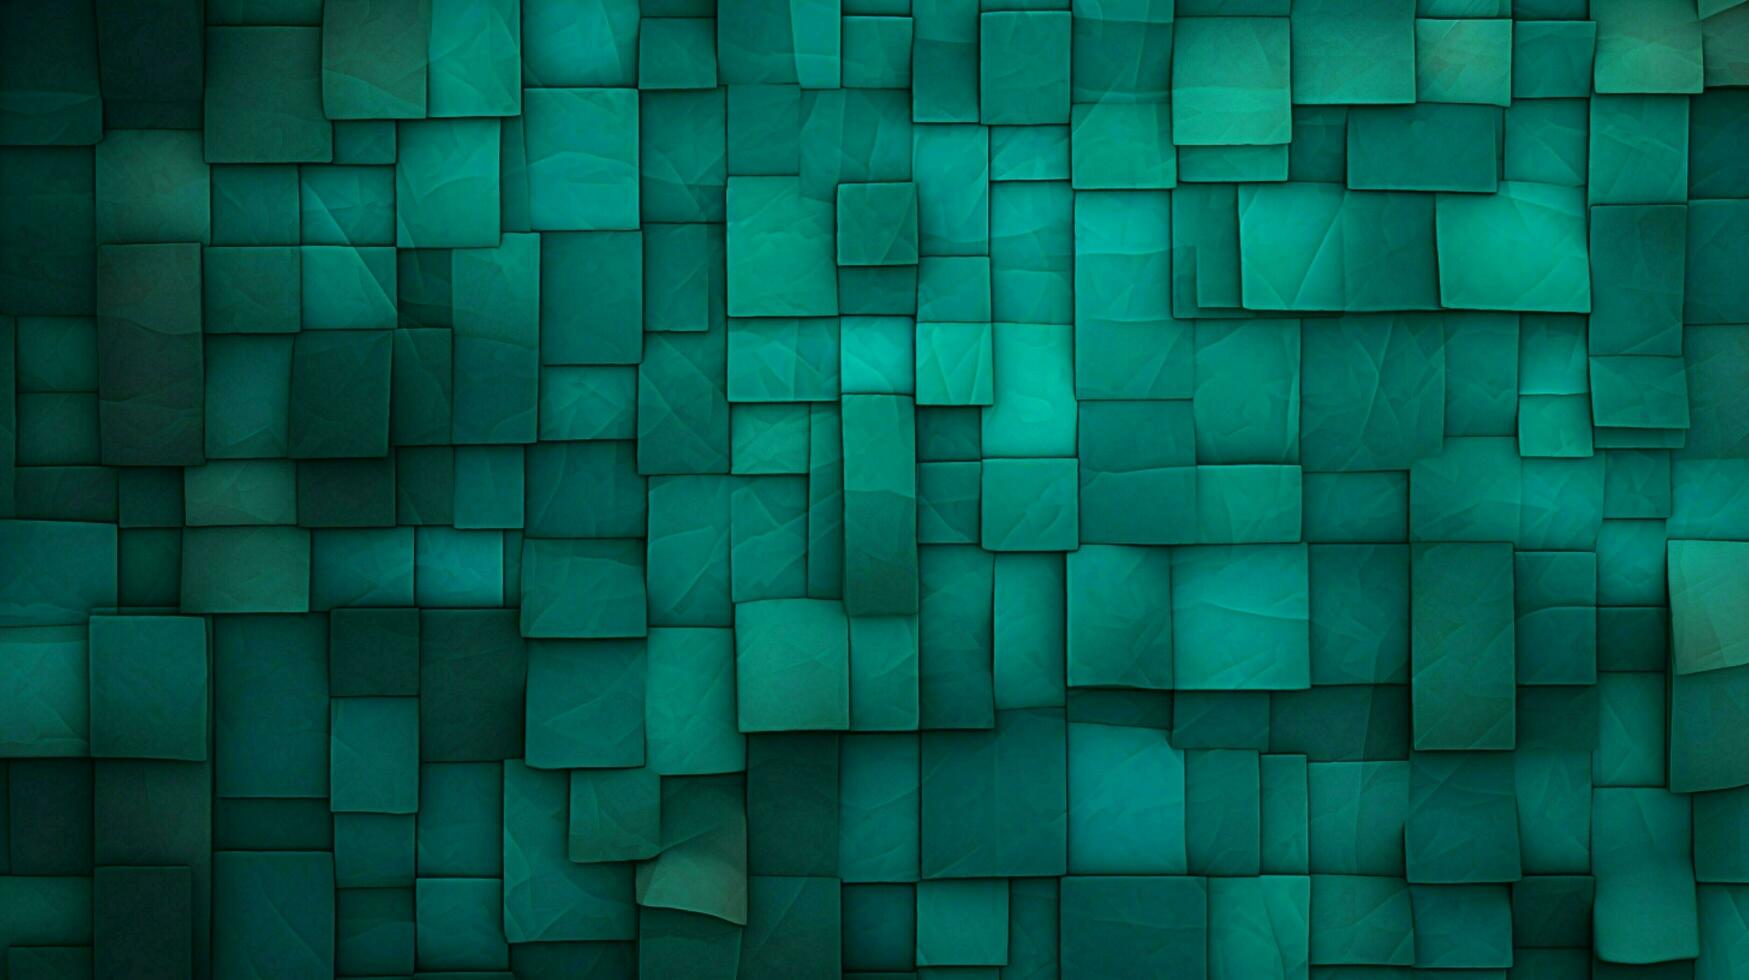 teal texture high quality photo